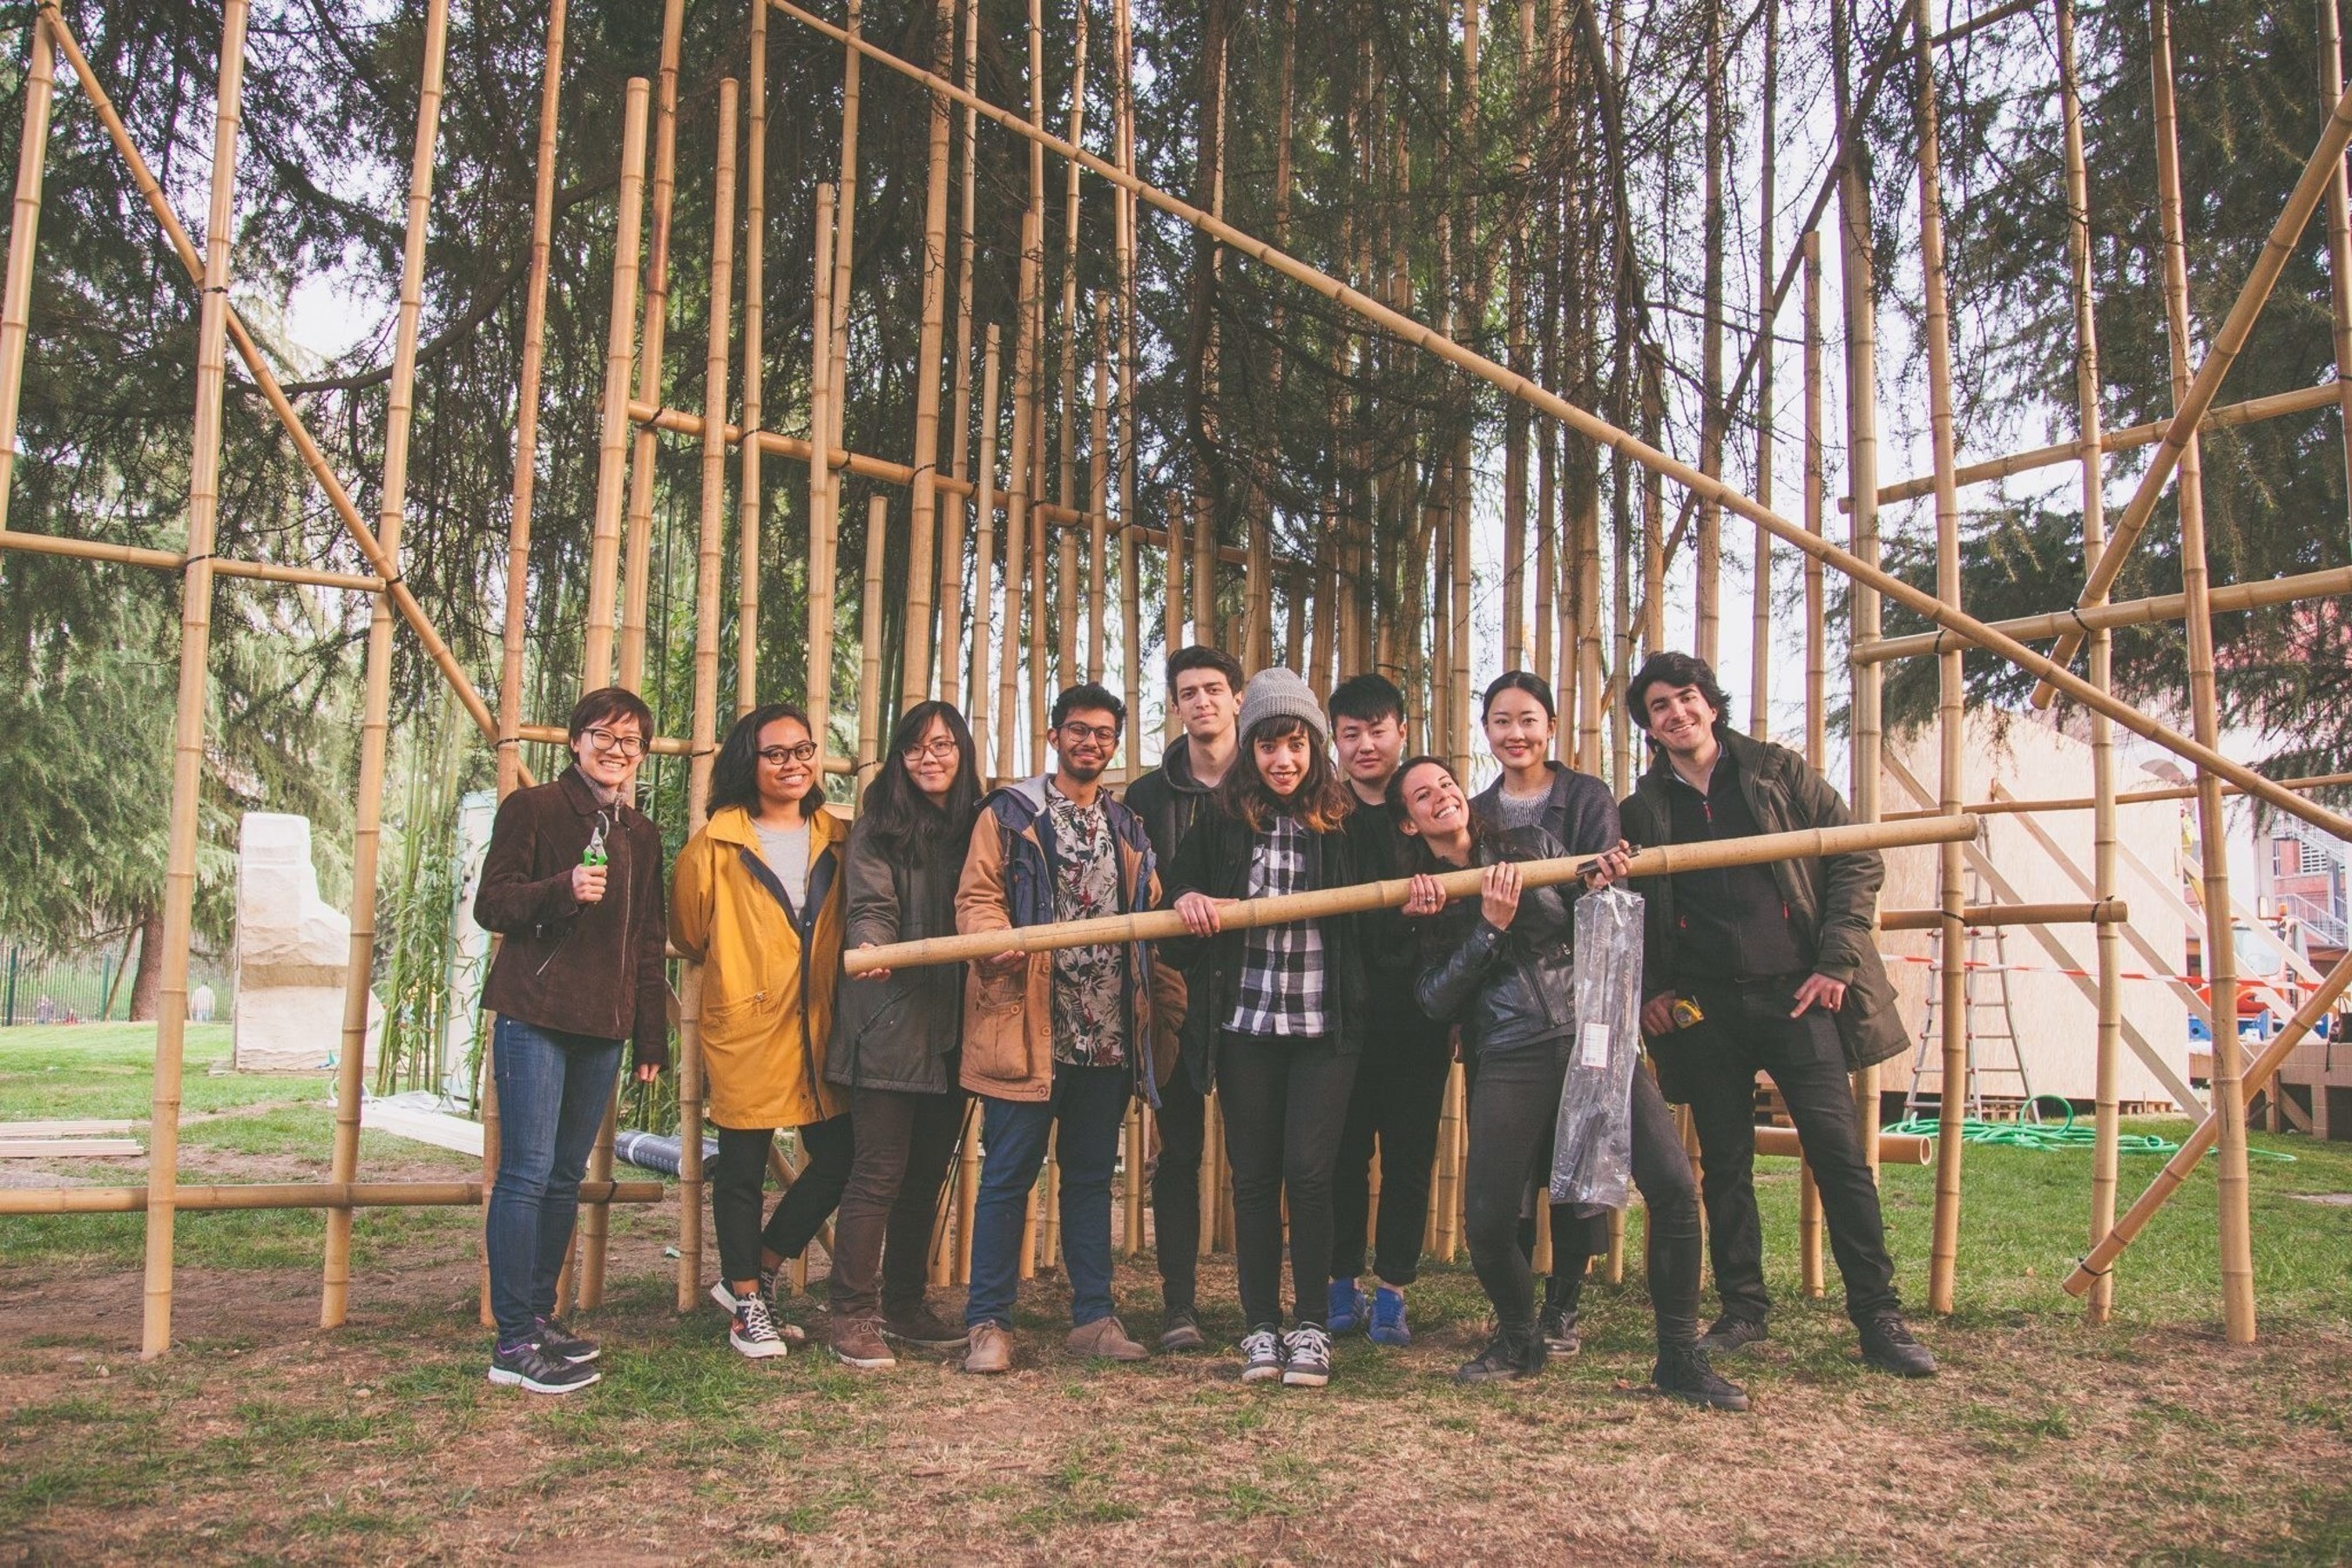 Students from world renowned design institutions Domus Academy and NABA (Milan) and Tsinghua University (Beijing) team up for the unveiling of the joint exhibition, Noosphere XX1: A Model for the Production of Knowledge, at the XXI Triennale International Exhibition 2016 in Milan. Open to the public beginning on April 2, the Pavilion in the Triennale Garden explores new scenarios between Past, Present and Future, inspiring new educational forms in the world of design.